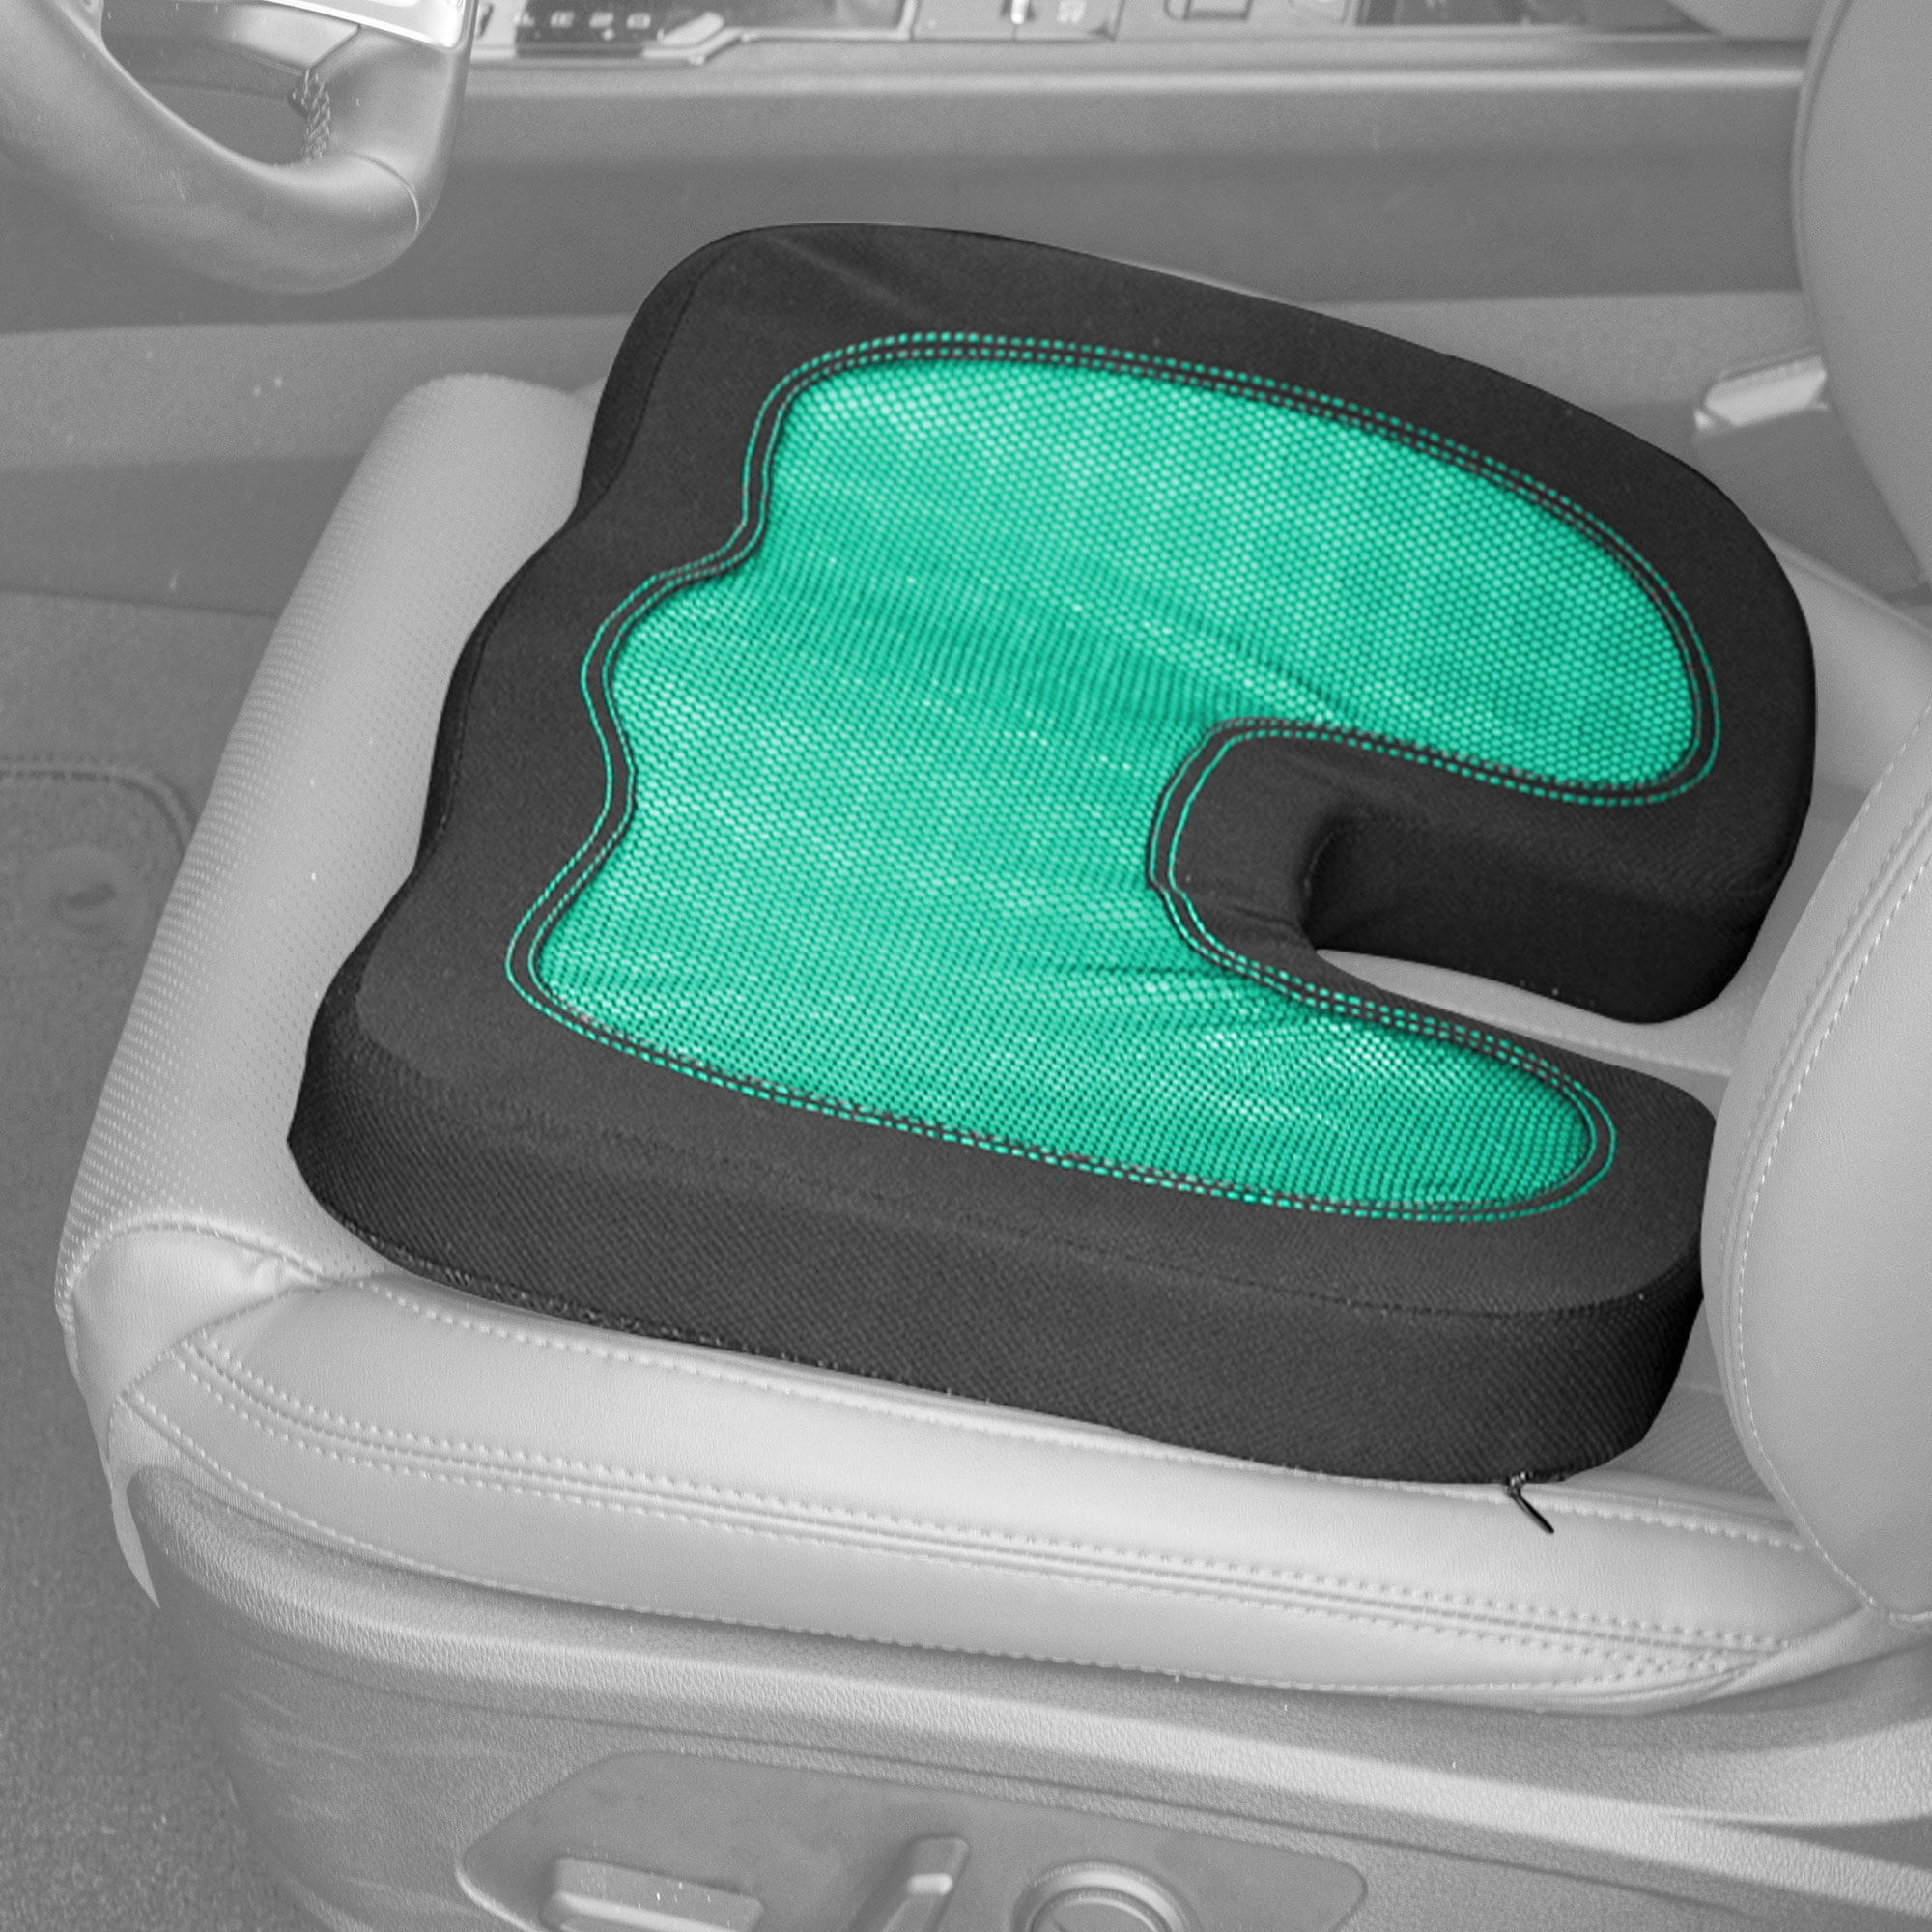 FH Group Doe16 Faux Rabbit Fur Front Set Car Seat Cushions (Green) with Air Freshener (affb216102green)